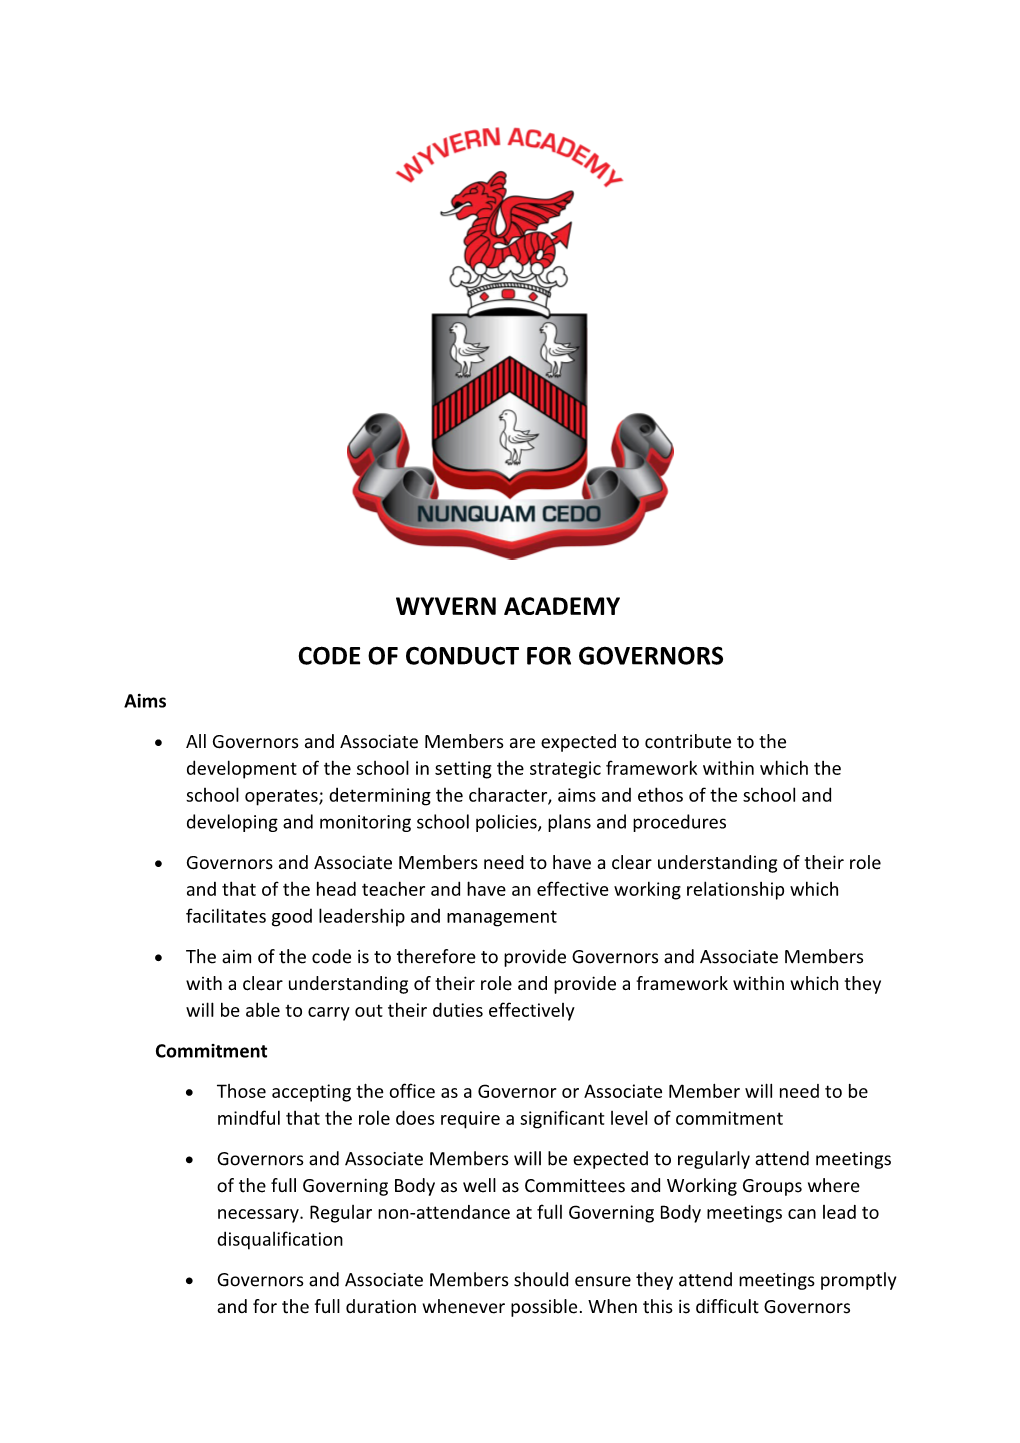 Code of Conduct for Governors